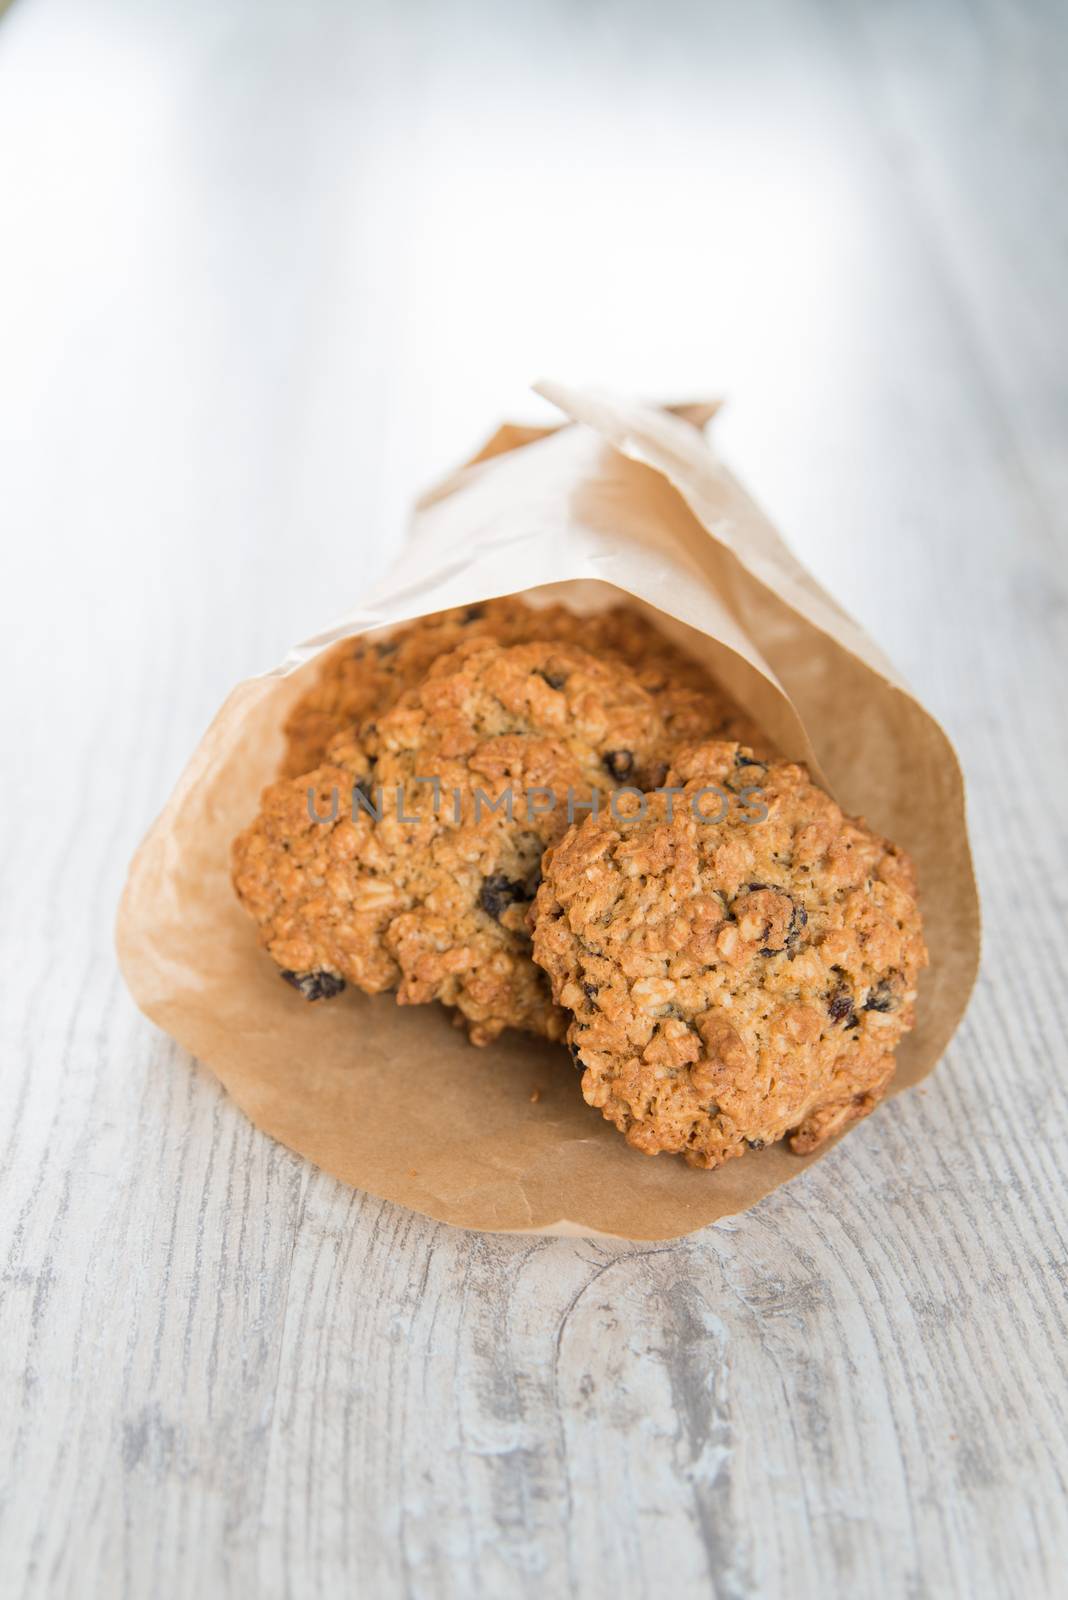 Oatmeal cookies in the craft paper bag